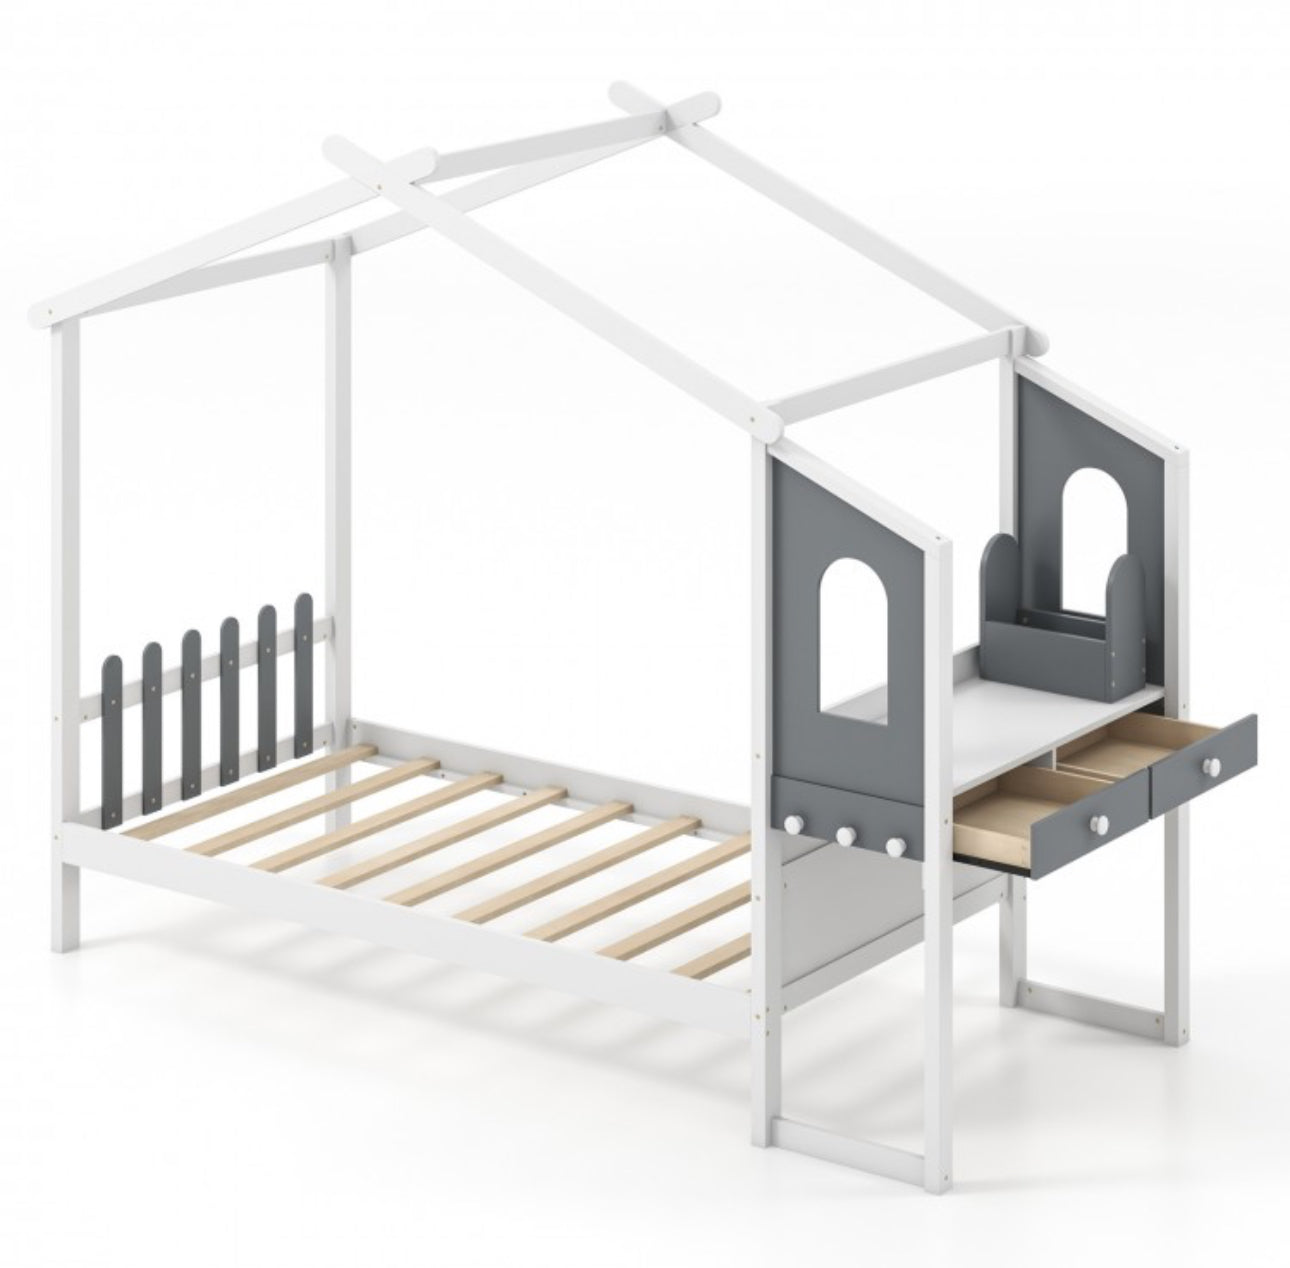 Super Cute & Adorable Modern  Twin Or Full Bed Frame House With Roof Canopy And Fence For Children, Kids | Heavy Duty  | Bed Space | Montessori | Desk, Drawers